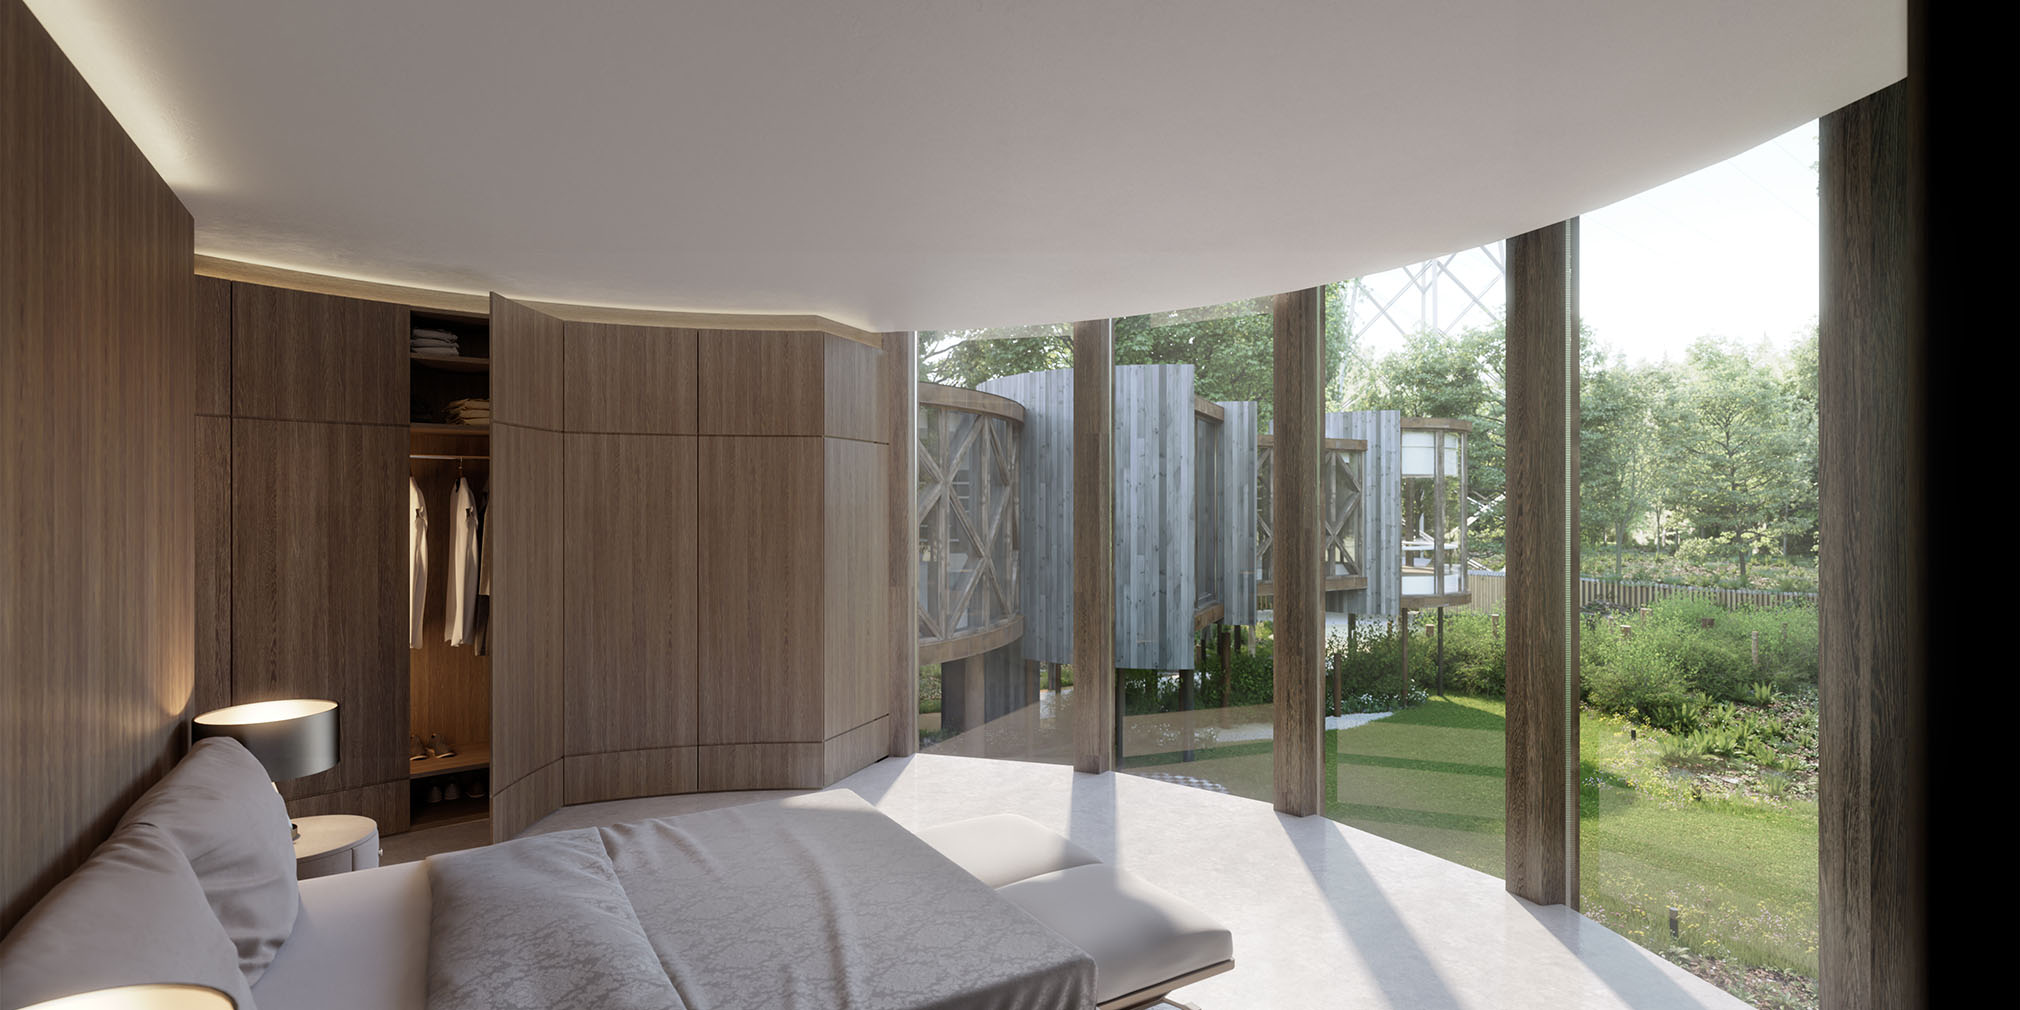 Interior visualisation of unbuilt treehouse home with planning permission hits the market in Ewes, Gloucestershire